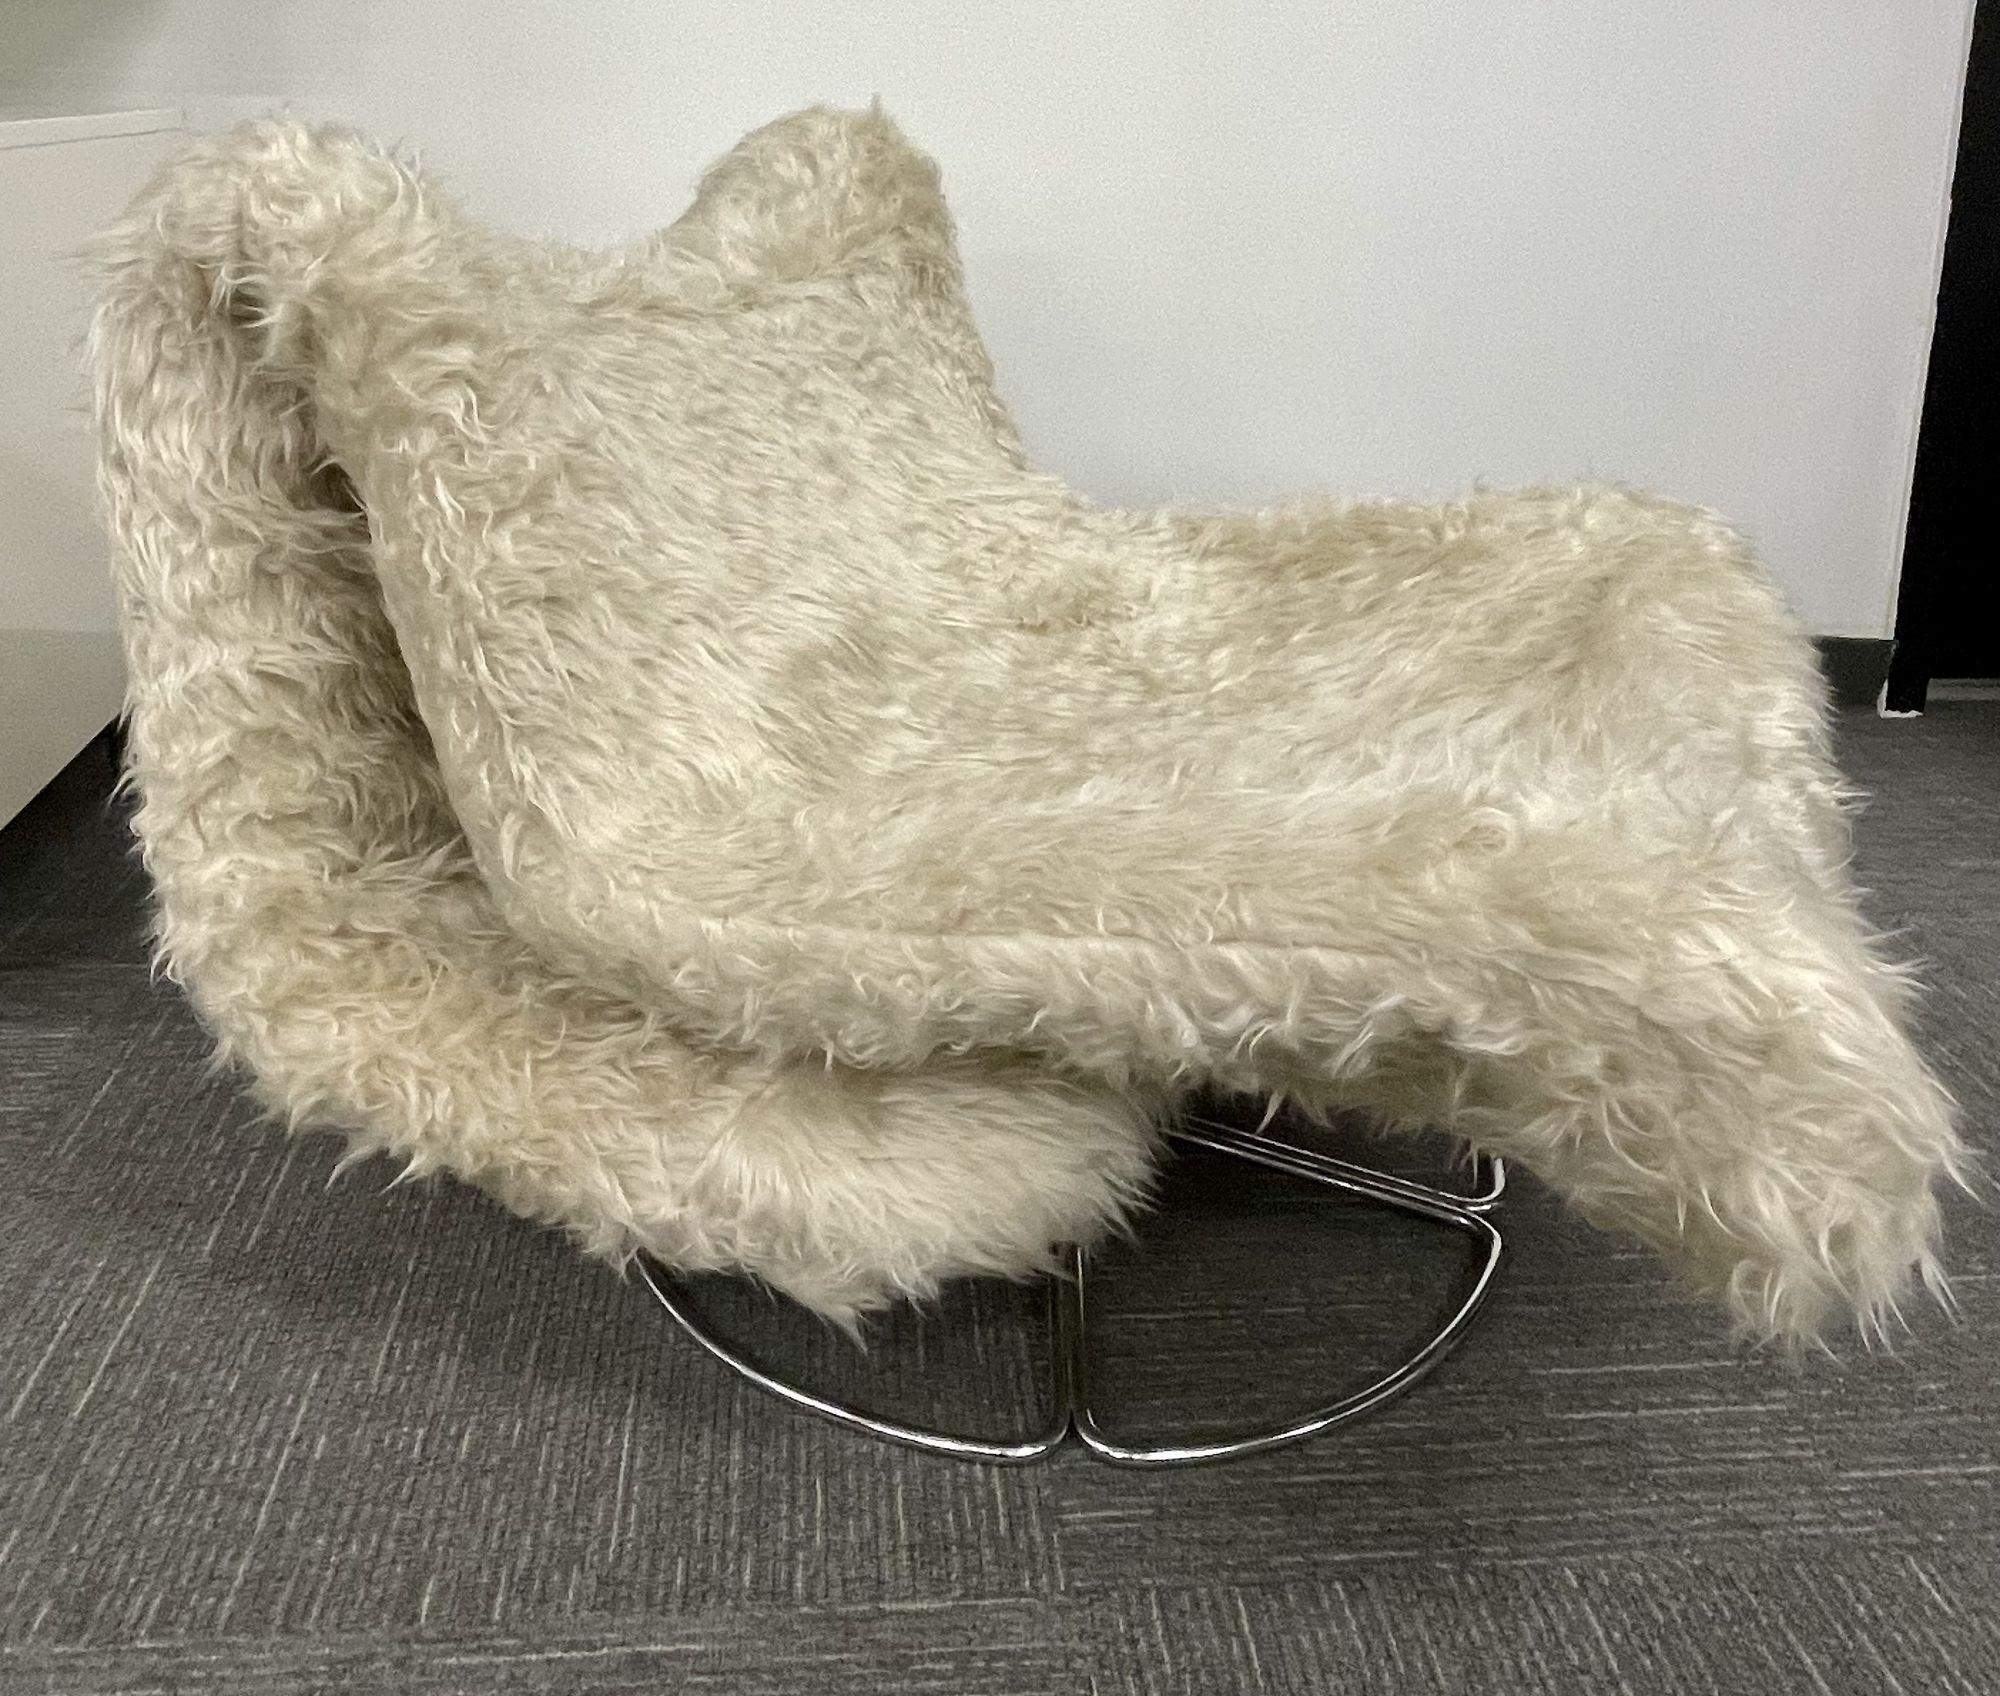 Low Slung Vintage Swivel chair in New Fur on a Chrome Base. 
 
 
 
Seat height: 14.5 in. 
 
IgXA.